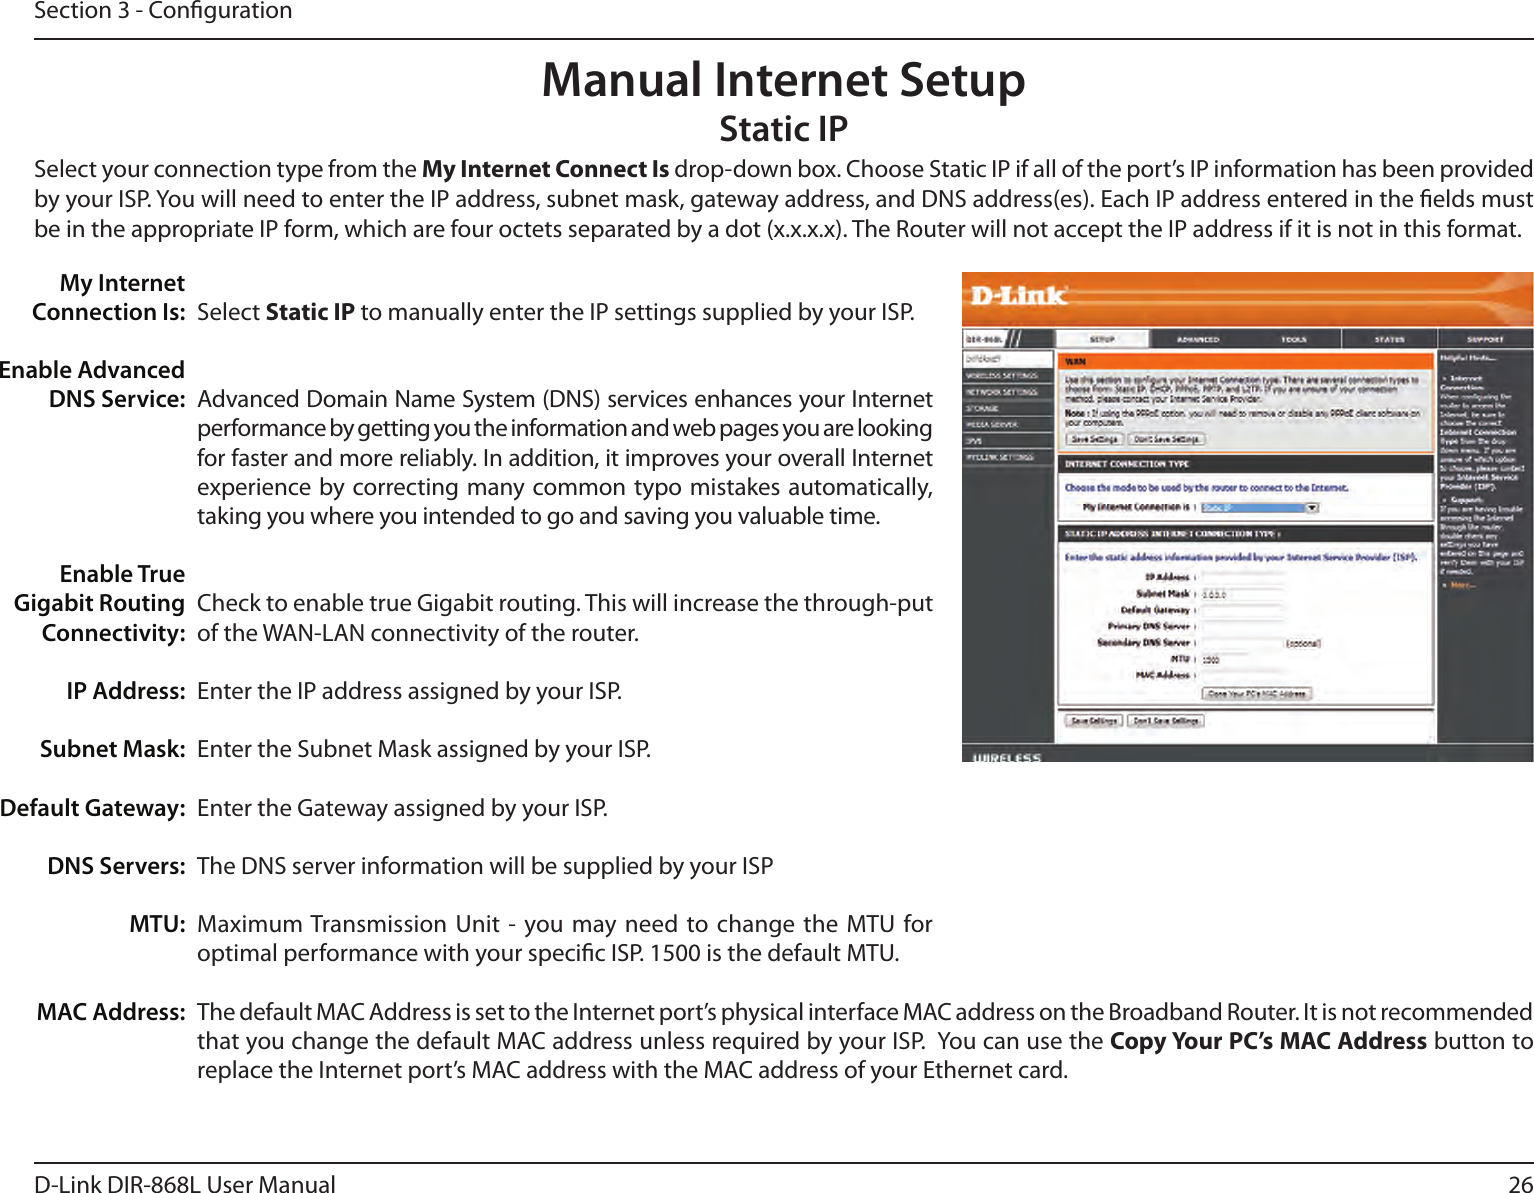 26D-Link DIR-868L User ManualSection 3 - CongurationSelect Static IP to manually enter the IP settings supplied by your ISP.Advanced Domain Name System (DNS) services enhances your Internet performance by getting you the information and web pages you are looking for faster and more reliably. In addition, it improves your overall Internet experience by correcting many common typo mistakes automatically, taking you where you intended to go and saving you valuable time.Check to enable true Gigabit routing. This will increase the through-put of the WAN-LAN connectivity of the router.Enter the IP address assigned by your ISP.Enter the Subnet Mask assigned by your ISP.Enter the Gateway assigned by your ISP.The DNS server information will be supplied by your ISPMaximum Transmission  Unit - you may need to change the MTU for optimal performance with your specic ISP. 1500 is the default MTU.The default MAC Address is set to the Internet port’s physical interface MAC address on the Broadband Router. It is not recommended that you change the default MAC address unless required by your ISP.  You can use the Copy Your PC’s MAC Address button to replace the Internet port’s MAC address with the MAC address of your Ethernet card.My Internet Connection Is:Enable Advanced DNS Service:Enable True Gigabit Routing Connectivity:IP Address:Subnet Mask:Default Gateway:DNS Servers:MTU:MAC Address:Manual Internet SetupStatic IPSelect your connection type from the My Internet Connect Is drop-down box. Choose Static IP if all of the port’s IP information has been provided by your ISP. You will need to enter the IP address, subnet mask, gateway address, and DNS address(es). Each IP address entered in the elds must be in the appropriate IP form, which are four octets separated by a dot (x.x.x.x). The Router will not accept the IP address if it is not in this format.